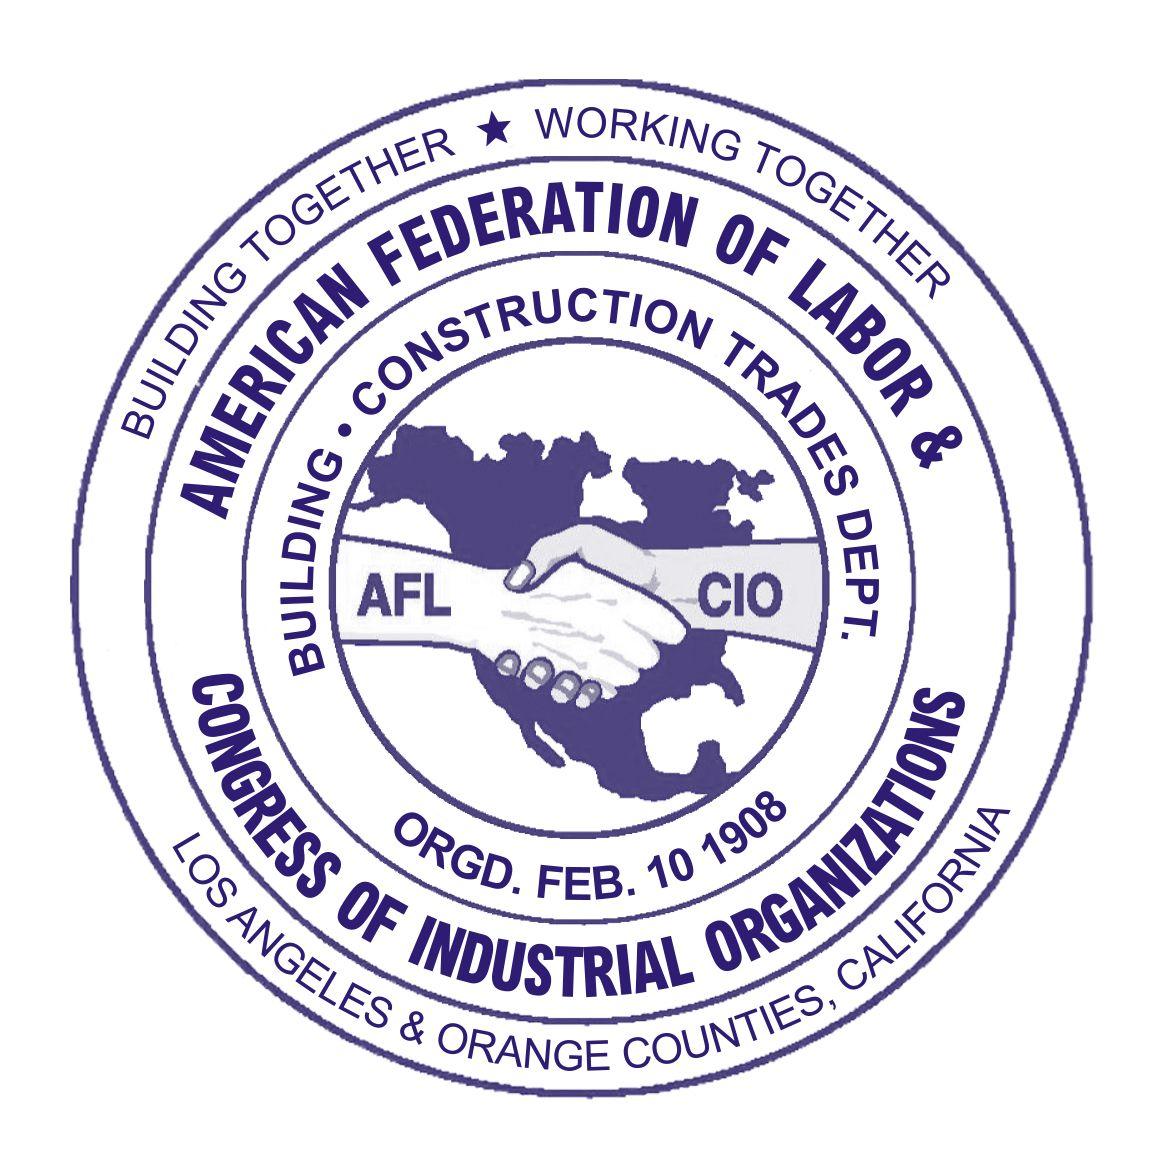 AFL-CIO Logo - From Meany to No Middle Class: The Marxist Decline at the AFL-CIO ...